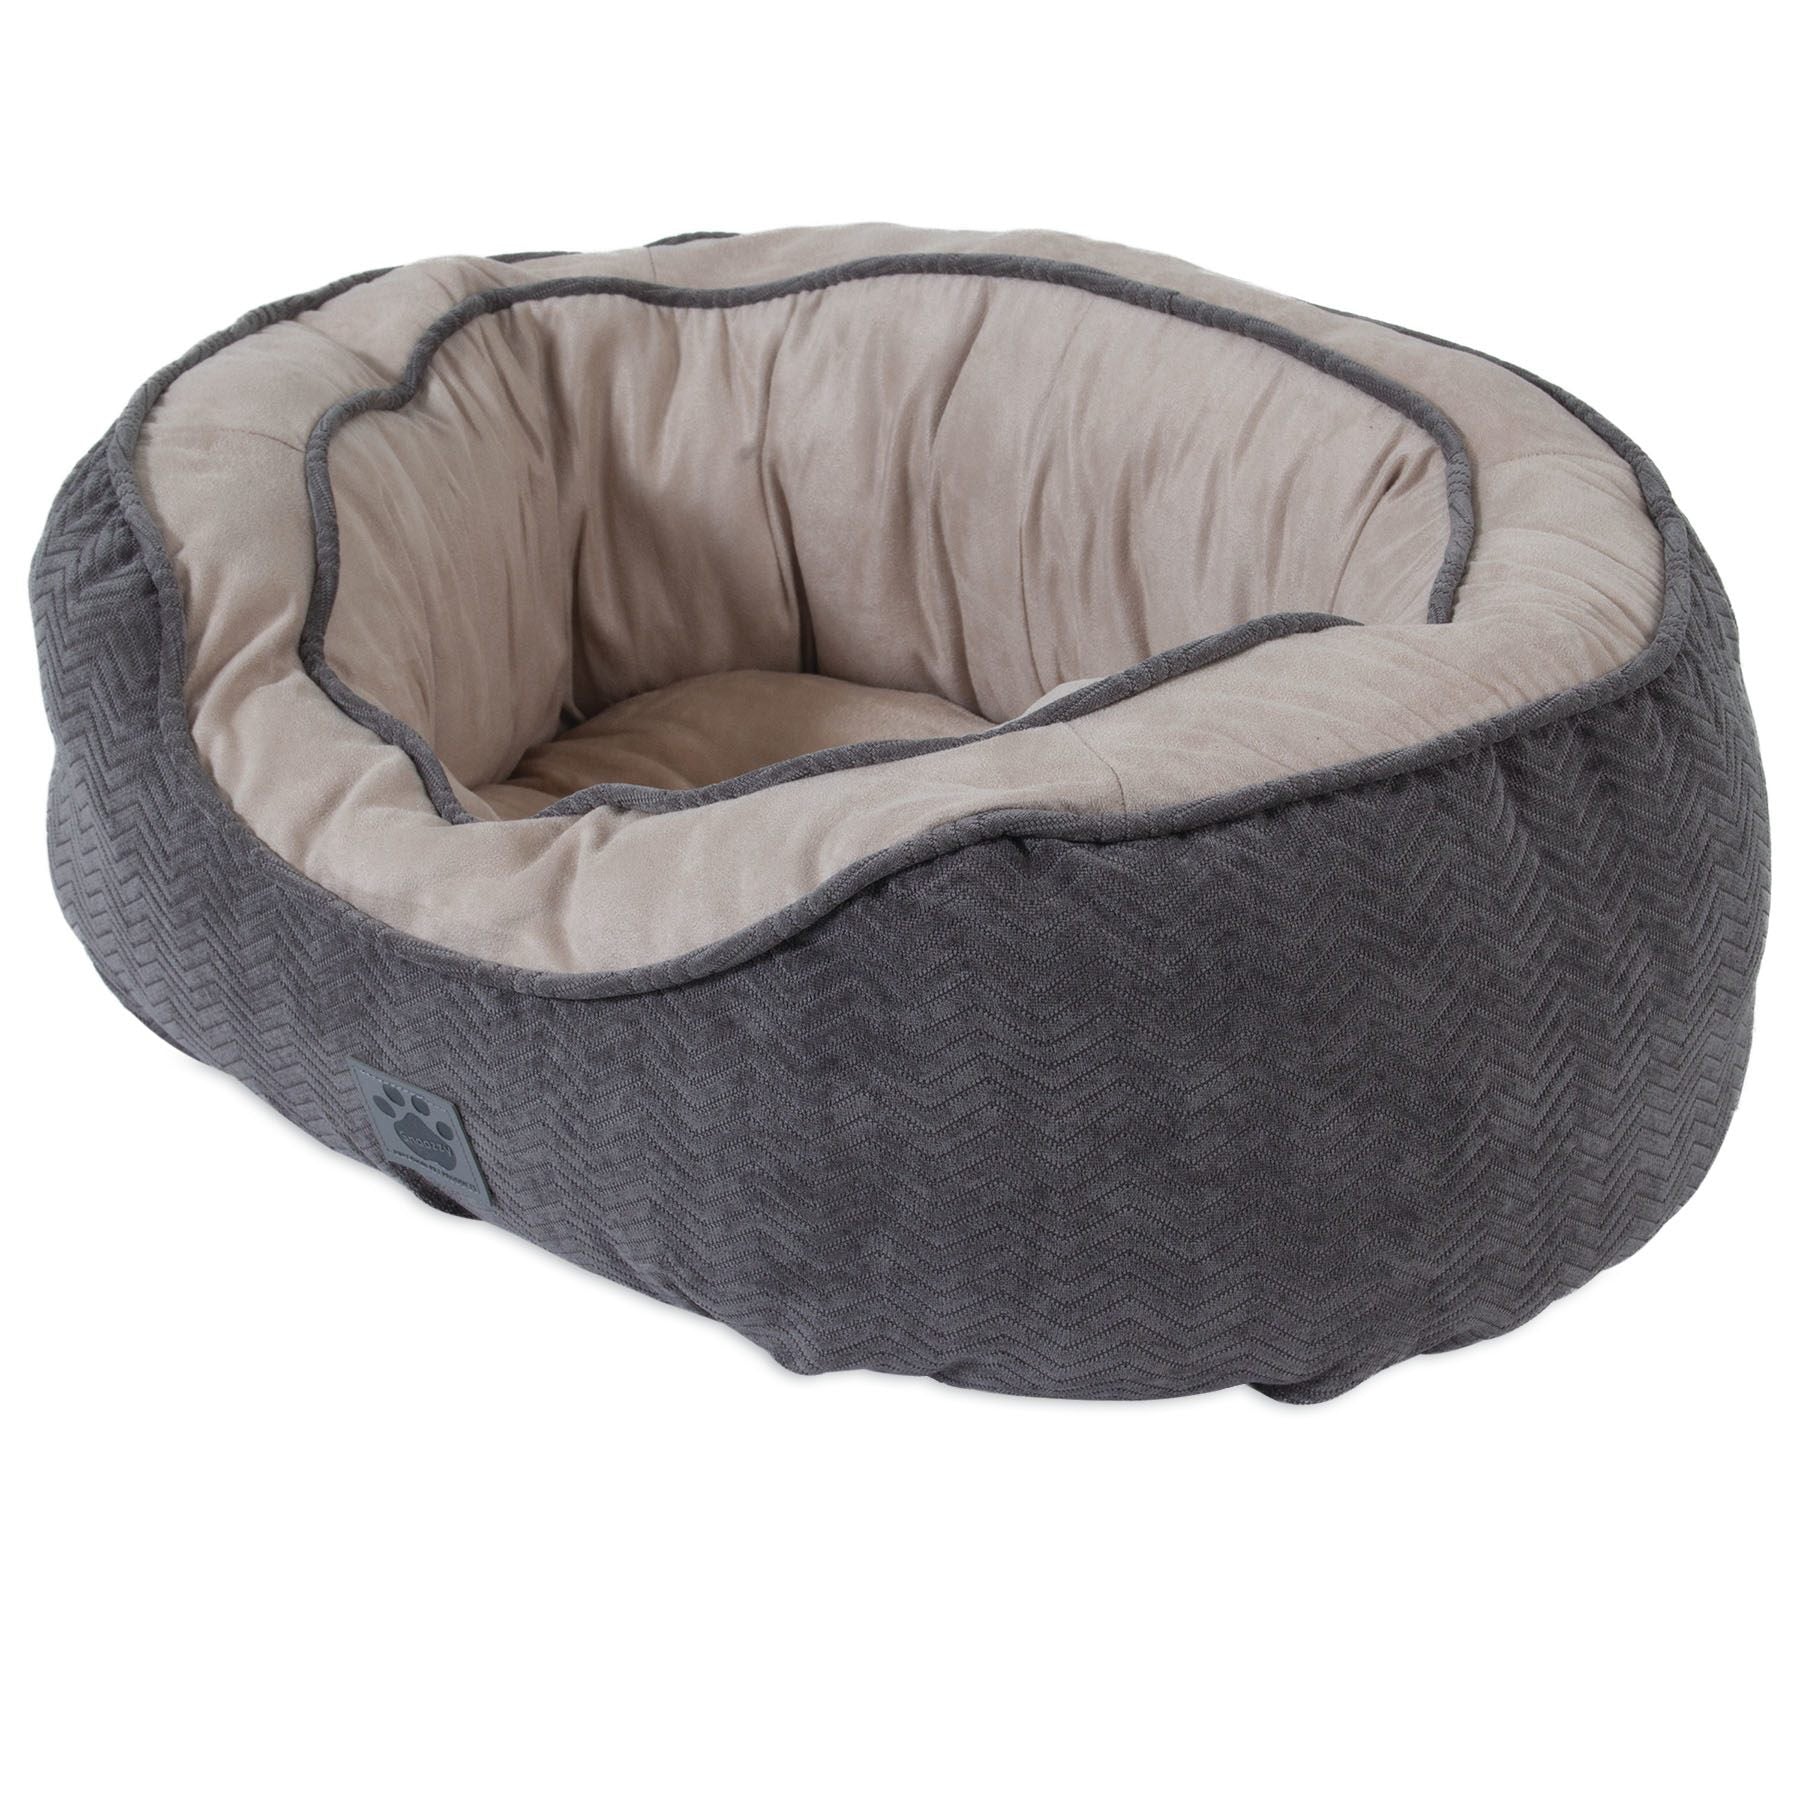 SnooZZy Chevron Gusset Daydreamer Gray Pet Bed